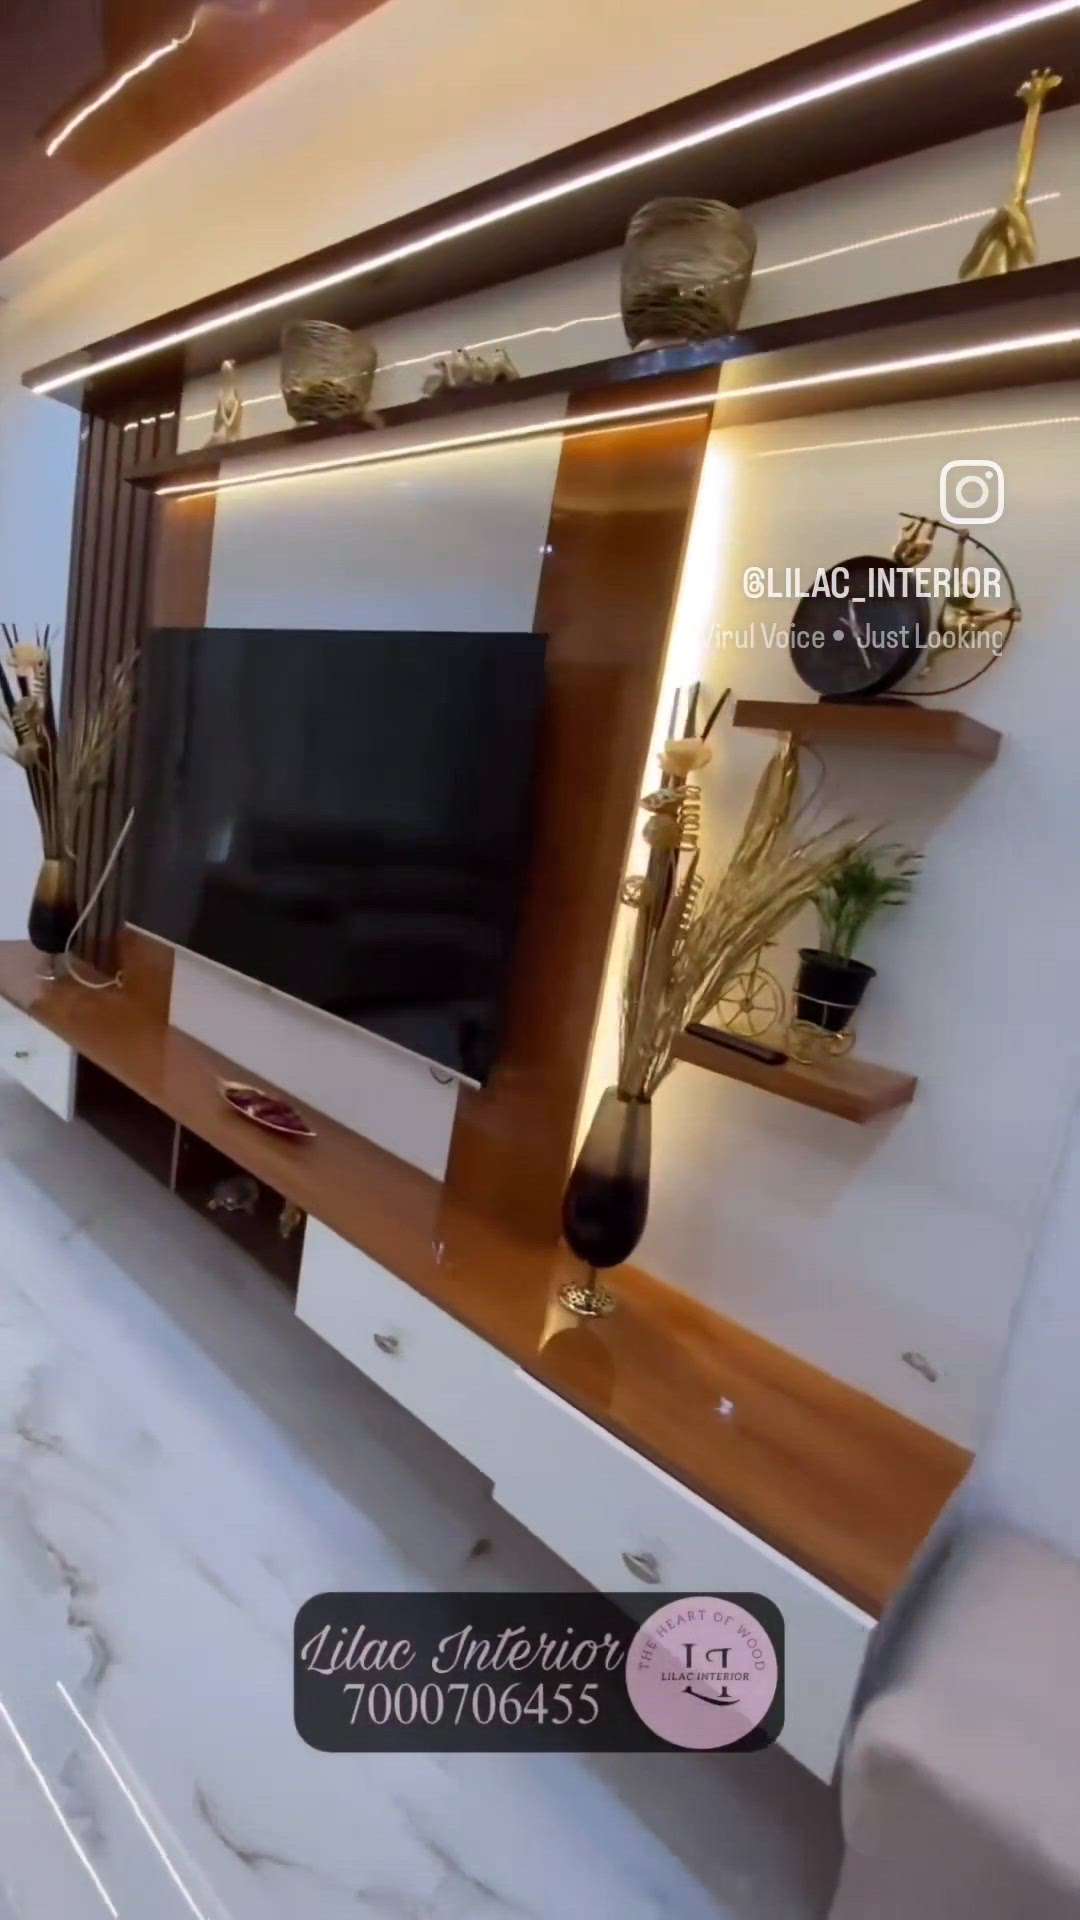 Just looking like Wow 🤩😍
TV unit by Lilac Interior🤩💗

#tvunit #interiordesign #furniture #livingroom #homedecor #interior #design #tv #livingroomdecor #tvcabinet #tvstand #home #furnituredesign #sofa #interiordesigner #interiors #decor #kitchen #kitchendesign #livingroomdesign #bed #homedesign #tvunitdesign #entertainmentunit #homefurniture #modularkitchen #bedroom #livingroomfurniture #coffeetable #modernfurniture

📞Contact for work - 7000706455 , 7701821801, 9889720650

📩 Comment or DM ' smart ' to order
💻 https://lilacinterior.com

Looking for one-stop interior design solutions for your dream home or office? 😍
At Lilac Interior, we don't just build homes but craft your desires into fresh designs to make you fall in love with your home! ✨
Get your dream home designed by us 💫

Follow on Instagram : @lilacinterior.official

#tvunit #tvunitdesign #walldecoration #walldecor #wallpanellingideas